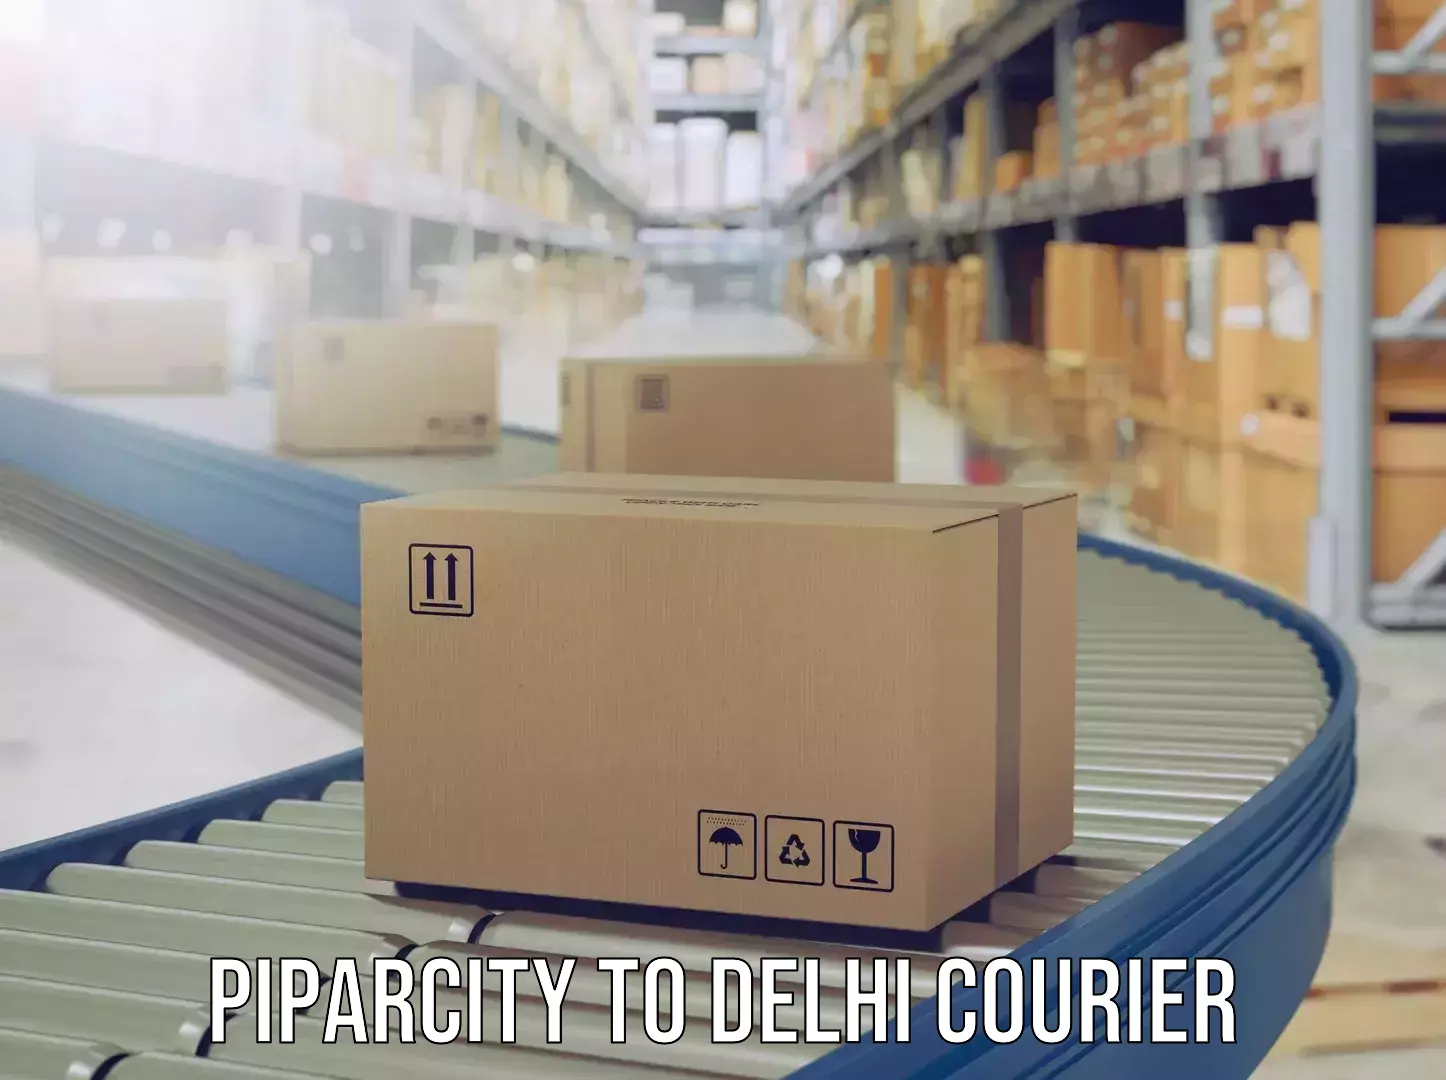 Emergency baggage service Piparcity to IIT Delhi